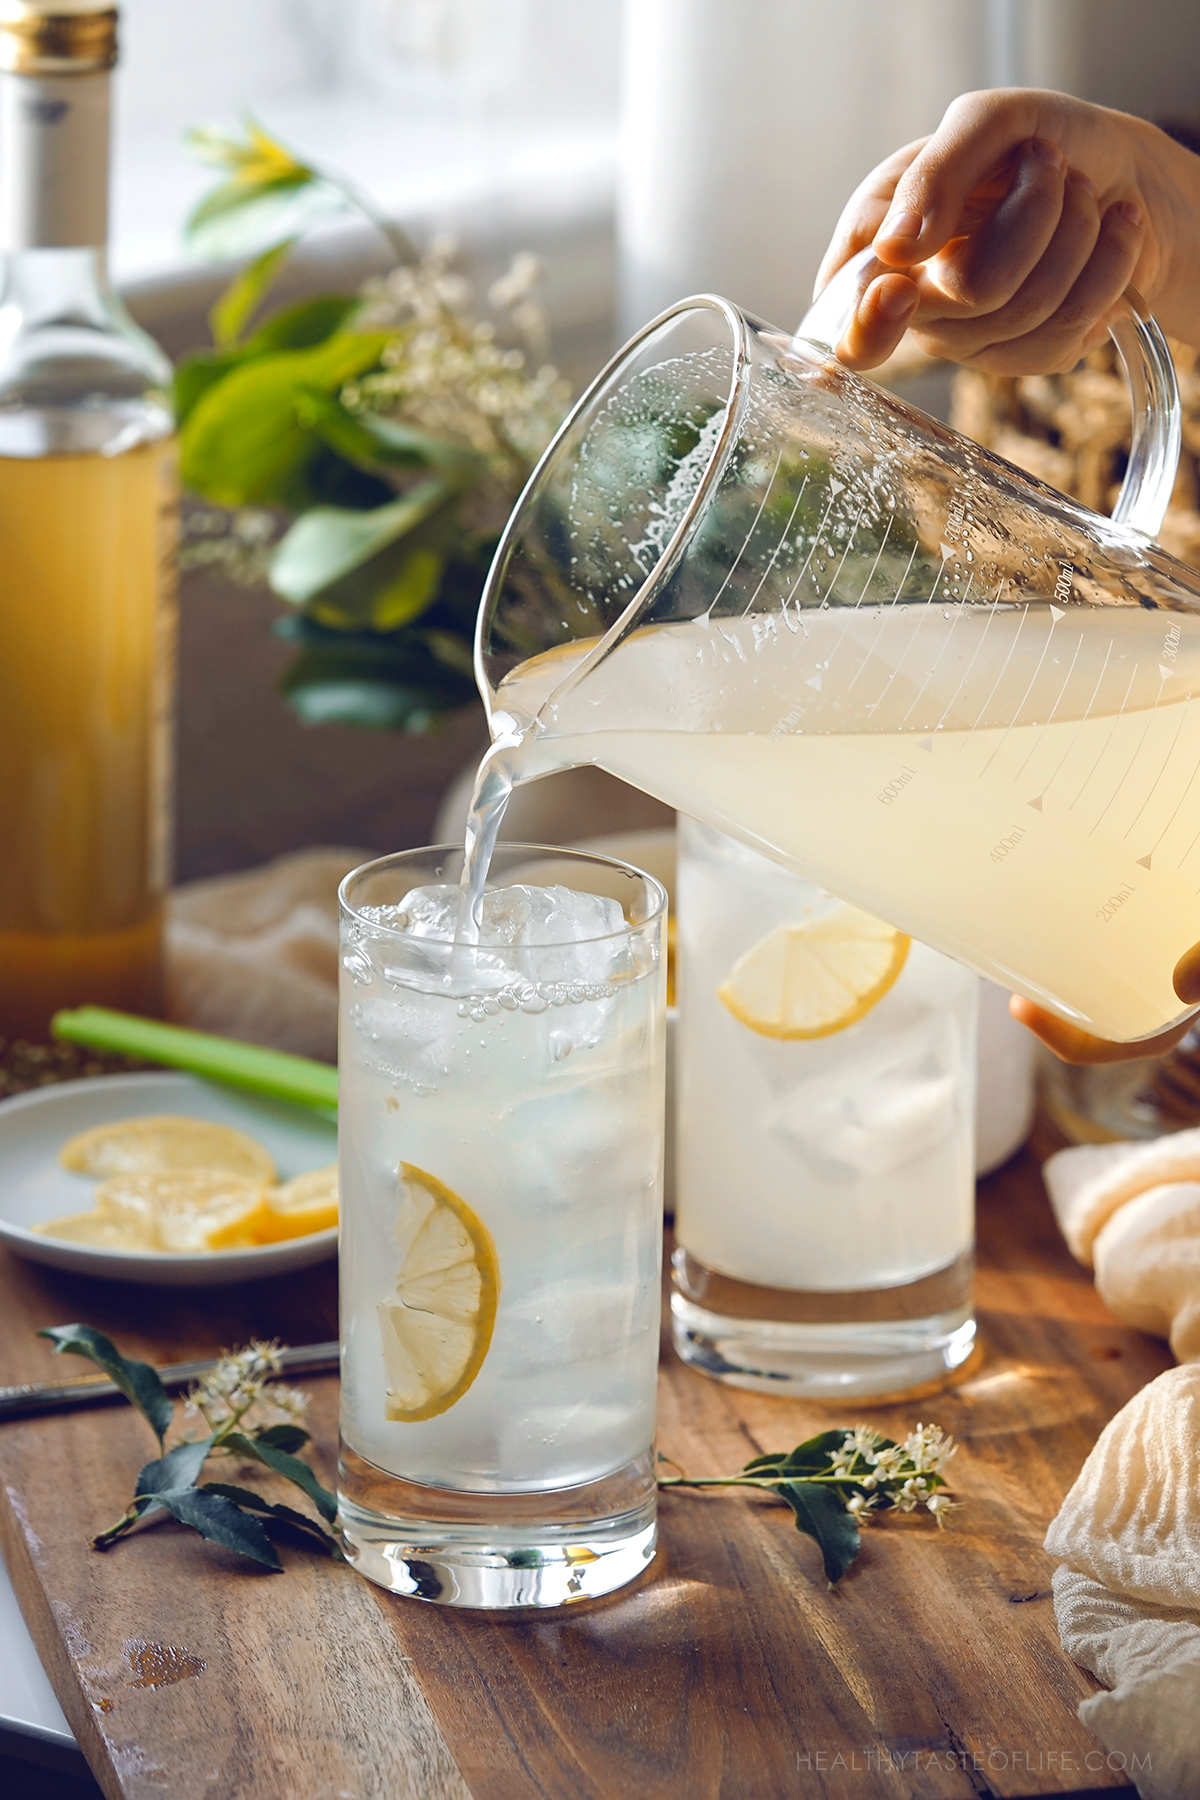 Photo showing the pouring of ready elederflower lemonade into serving glasses with ice.